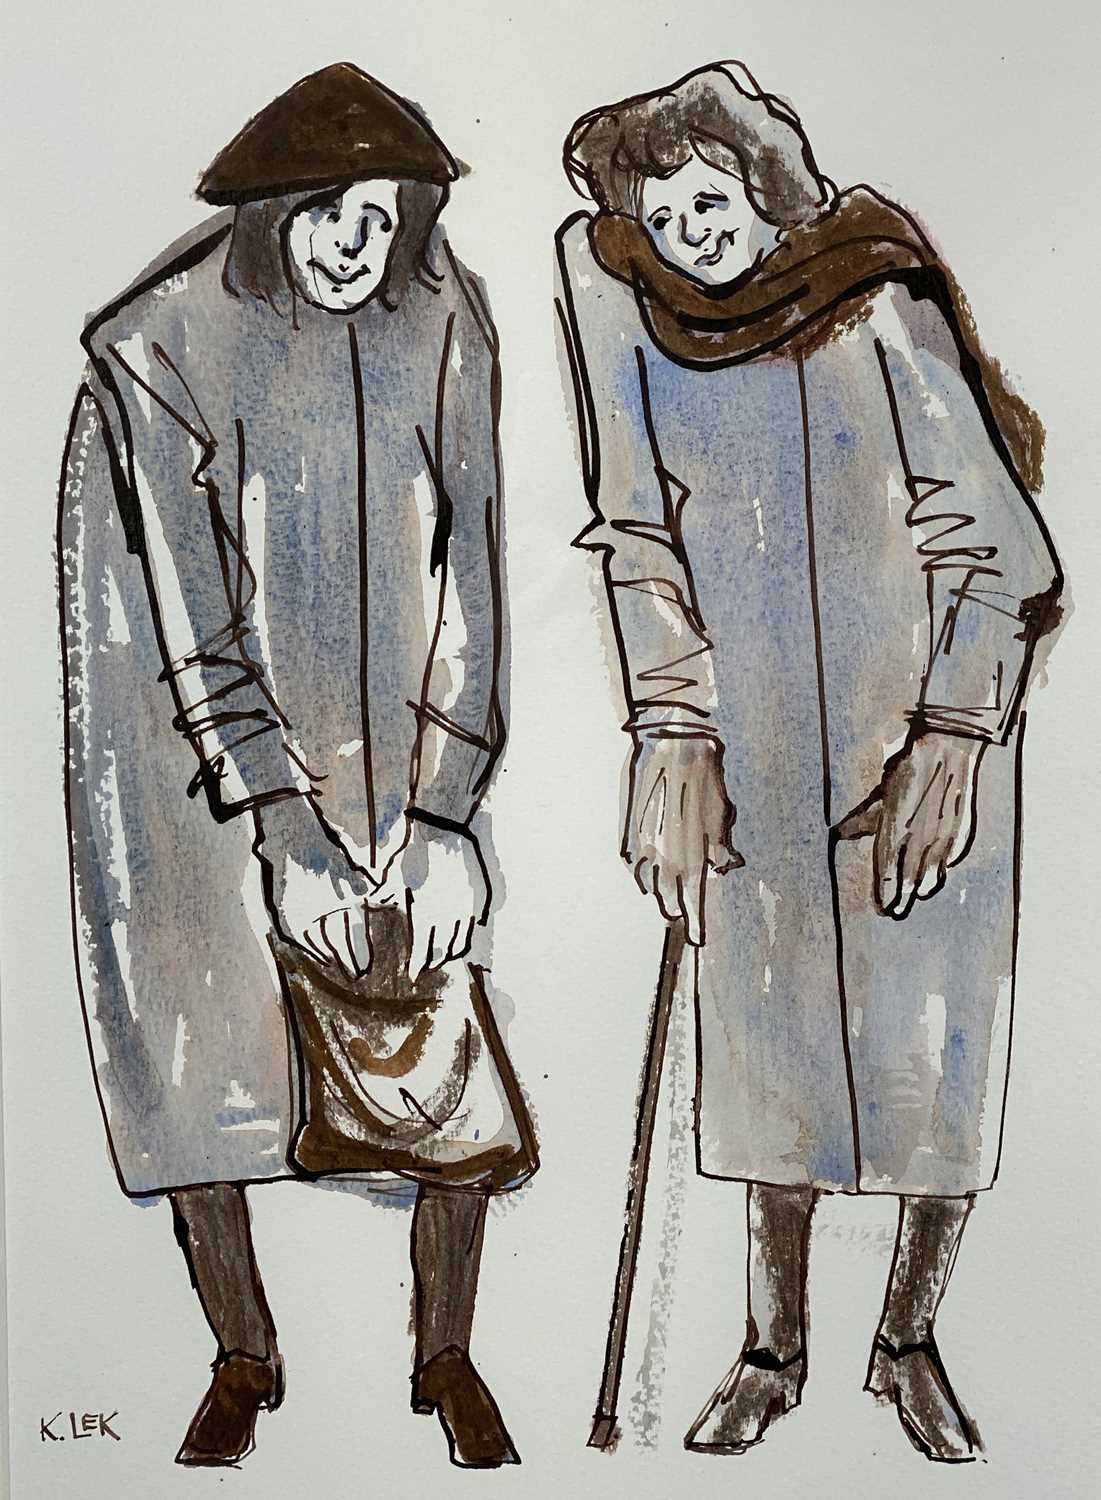 ‡ KAREL LEK acrylic on paper - two ladies chatting, entitled verso "Conversation", dated 2011,